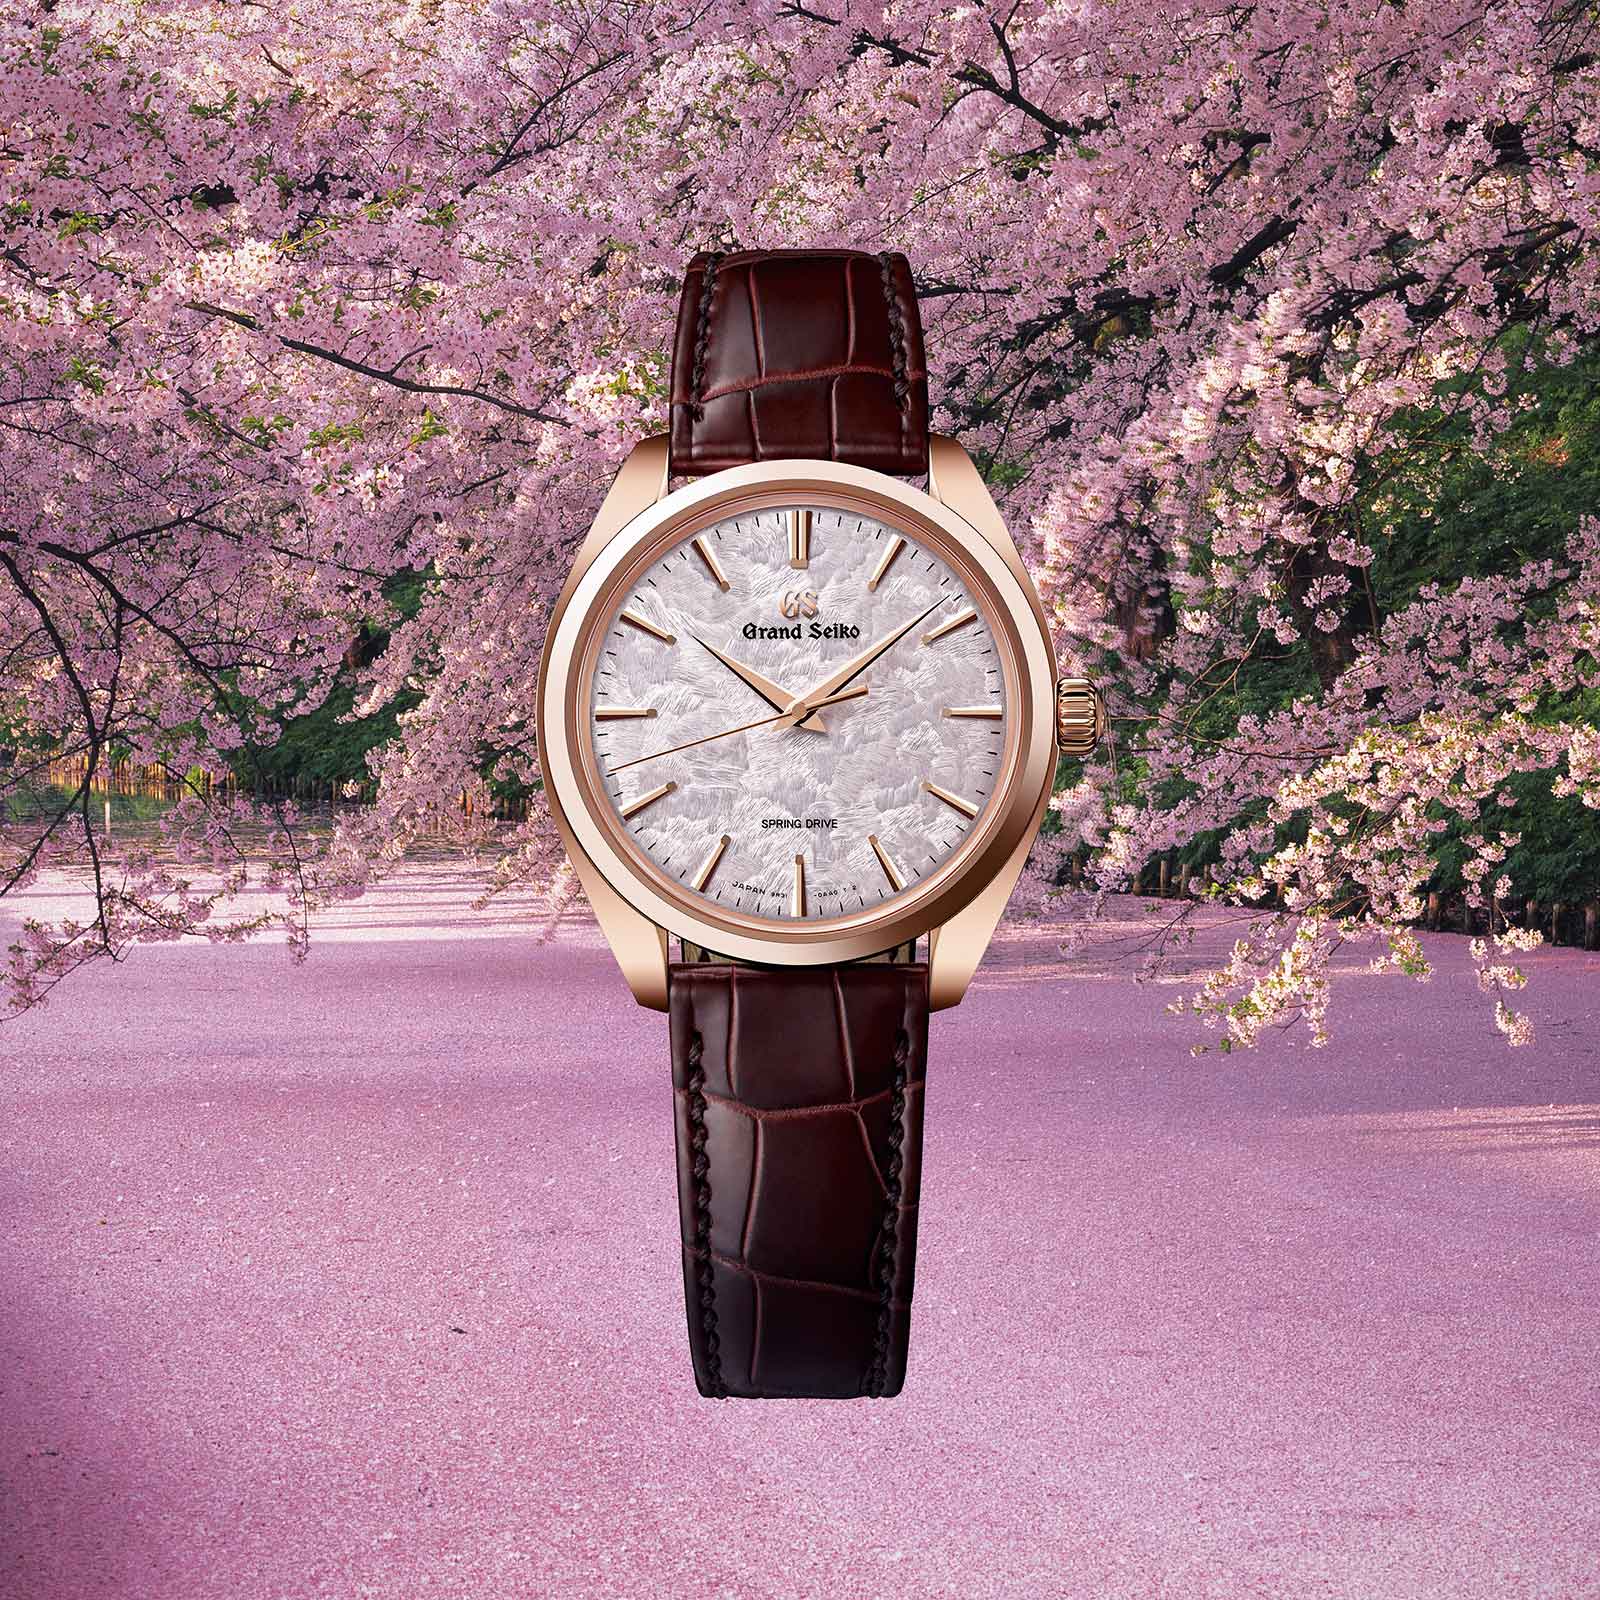 Grand Seiko SBGY026 Spring Drive watch with rose gold case and pink dial.